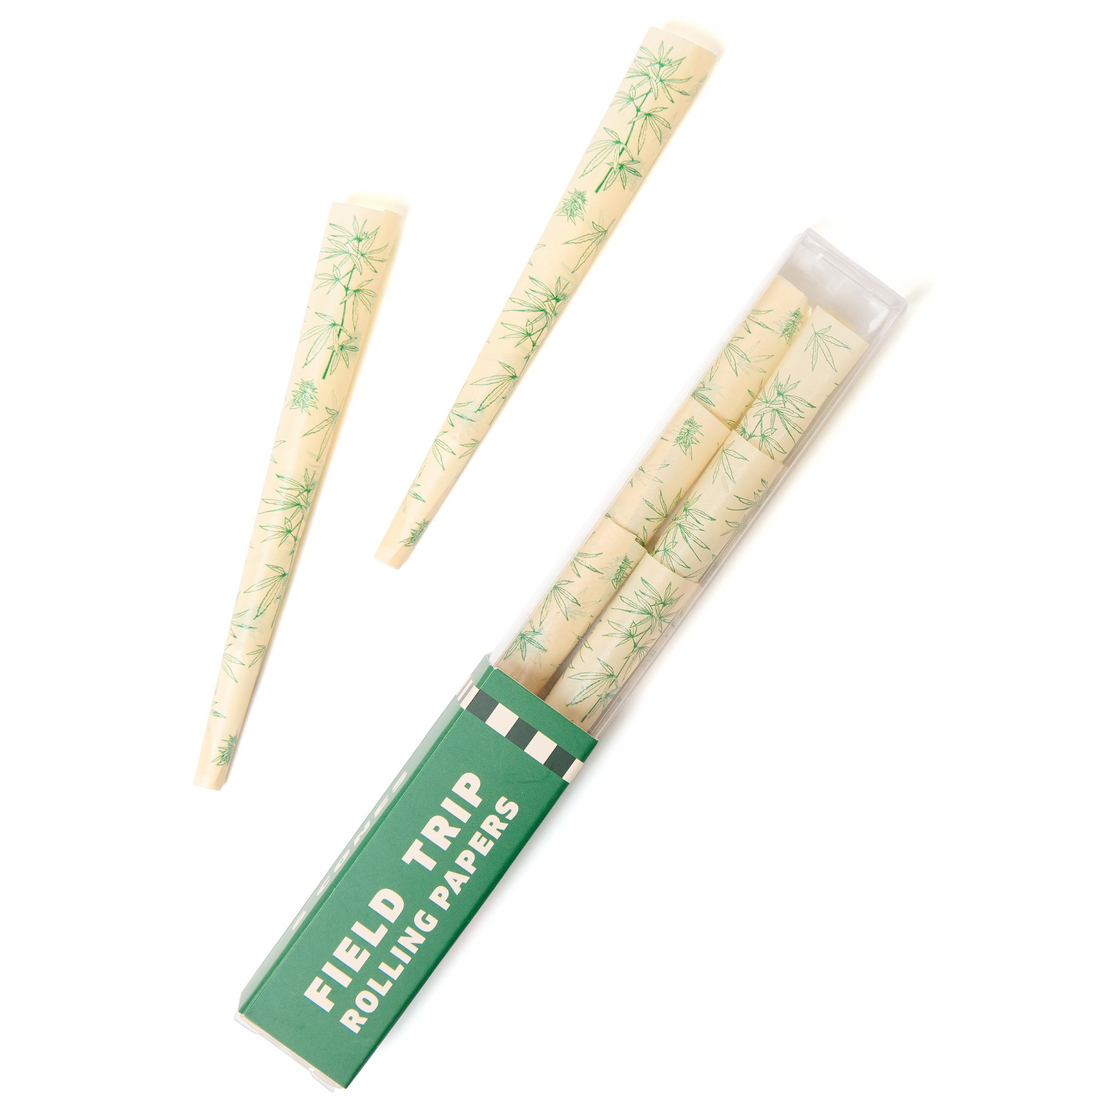 Botanical Printed Pre-Roll Cone Packs from Field Trip Papers